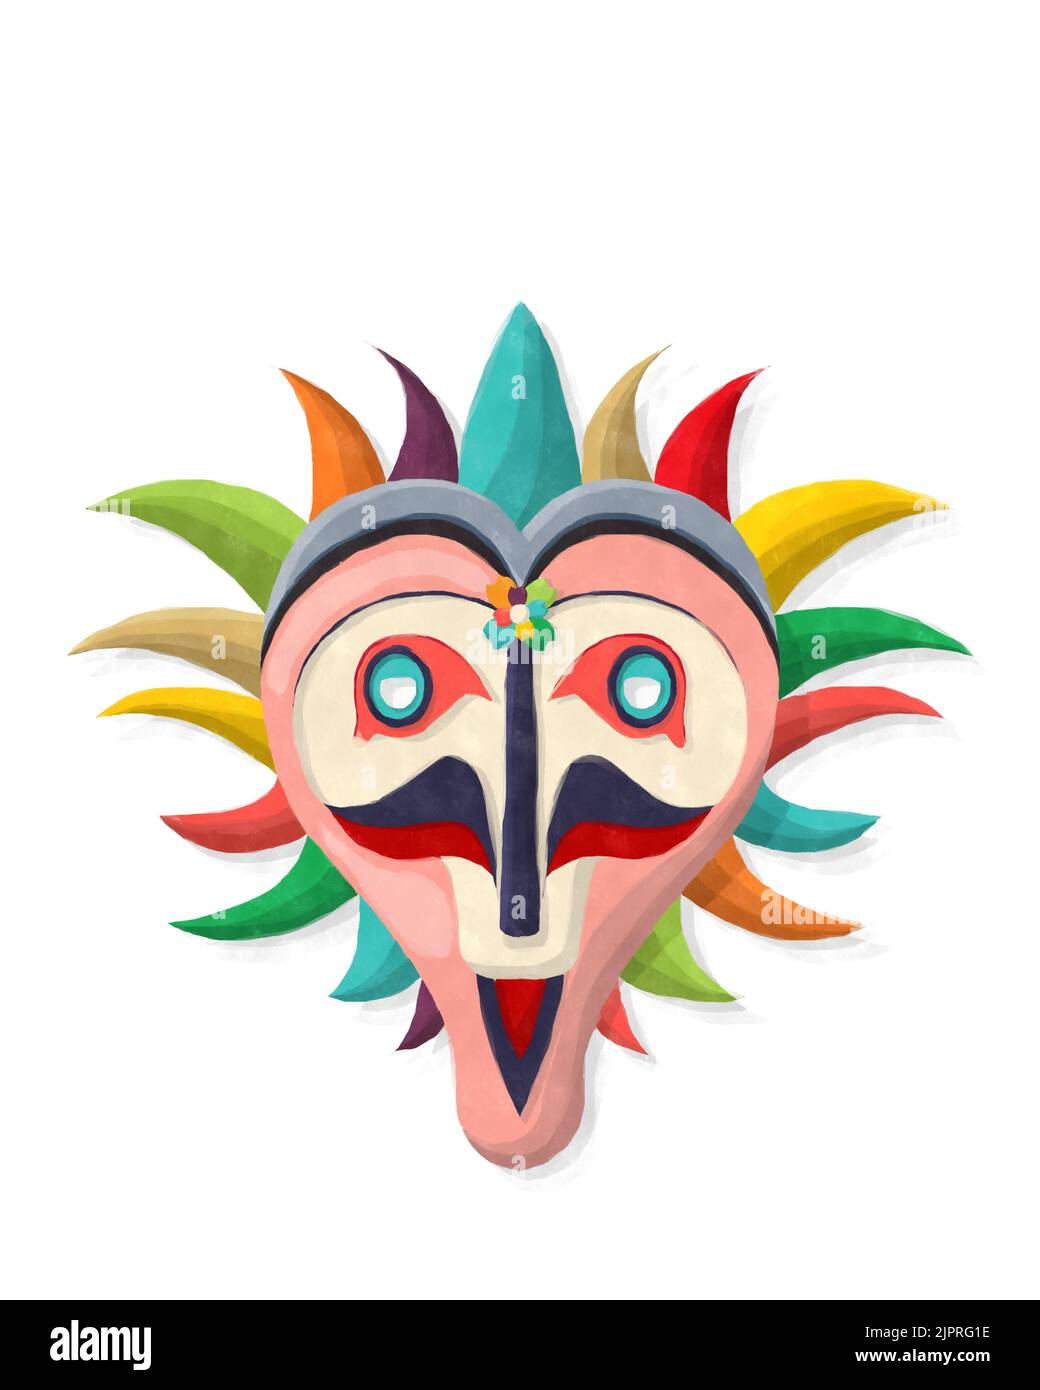 Watercolor style drawing of a carnival mask over white background Stock Photo